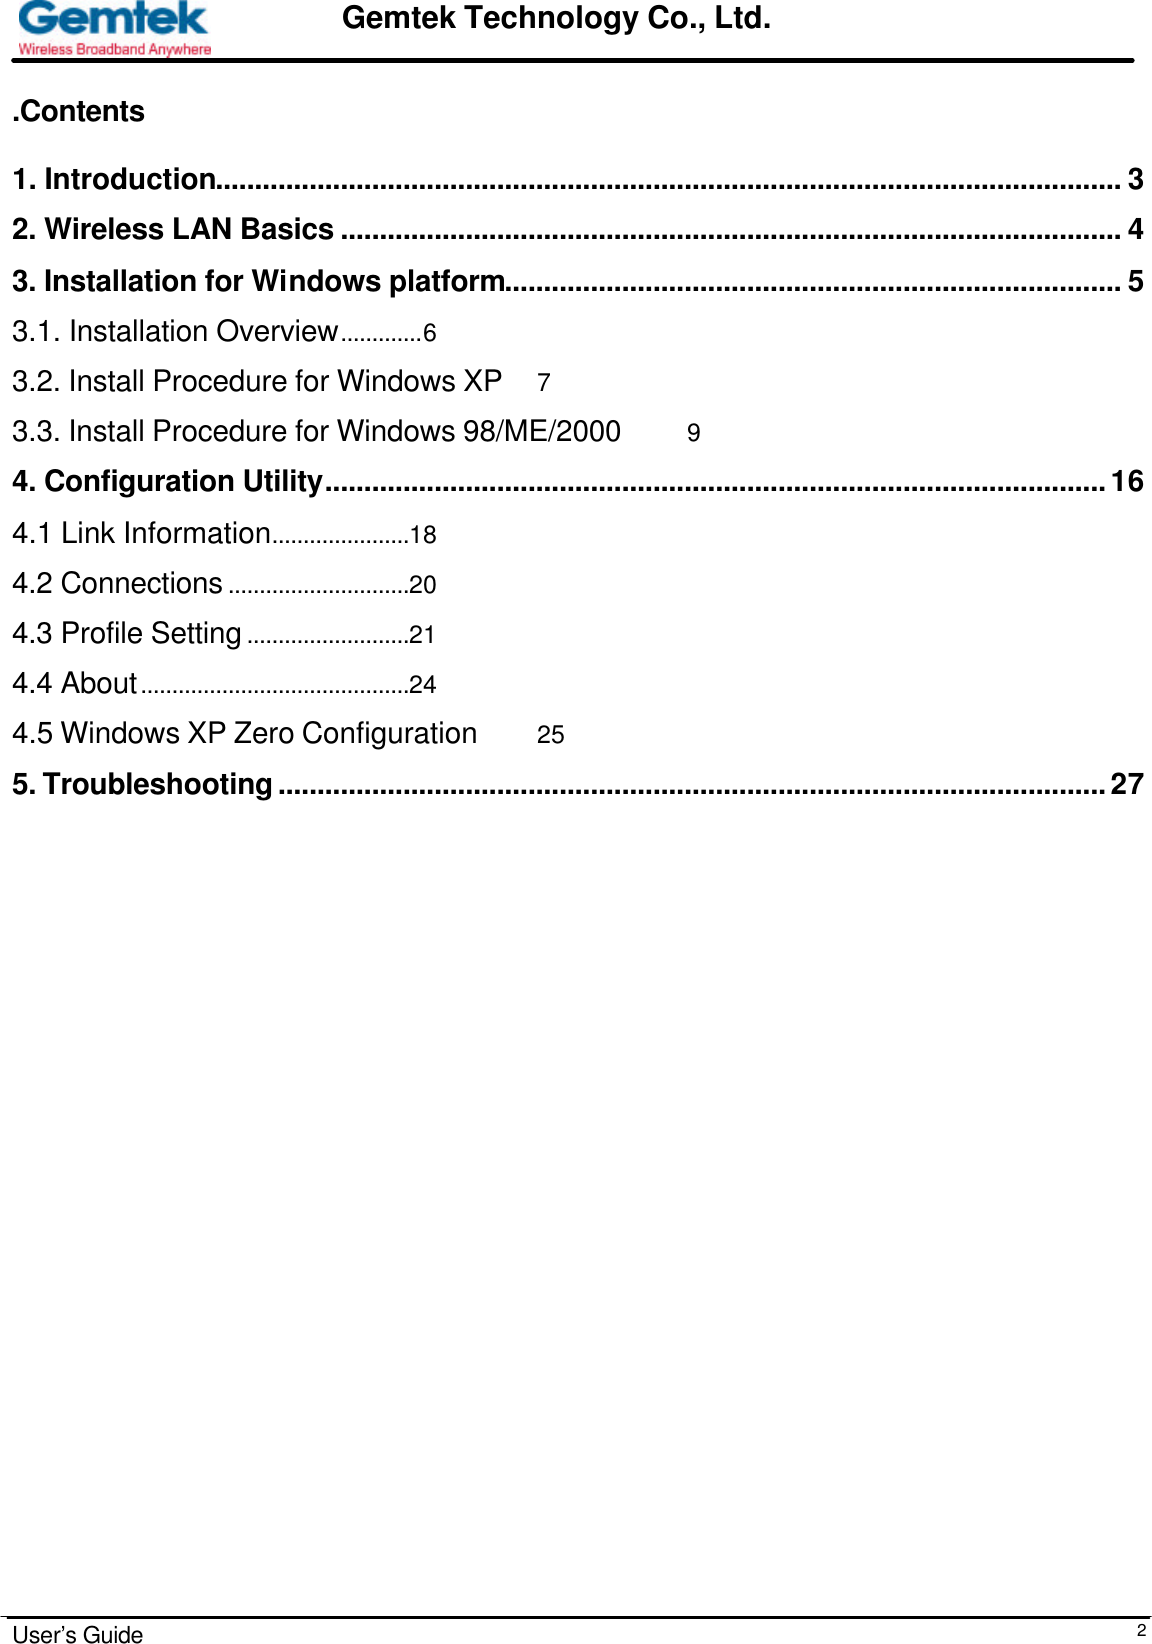                                                                                                                                                                                                                                                                      User’s Guide  2Gemtek Technology Co., Ltd. .Contents  1. Introduction.................................................................................................................... 3 2. Wireless LAN Basics .................................................................................................... 4 3. Installation for Windows platform............................................................................... 5 3.1. Installation Overview.............6 3.2. Install Procedure for Windows XP 7 3.3. Install Procedure for Windows 98/ME/2000 9 4. Configuration Utility....................................................................................................16 4.1 Link Information......................18 4.2 Connections .............................20 4.3 Profile Setting ..........................21 4.4 About...........................................24 4.5 Windows XP Zero Configuration 25 5. Troubleshooting..........................................................................................................27                                   